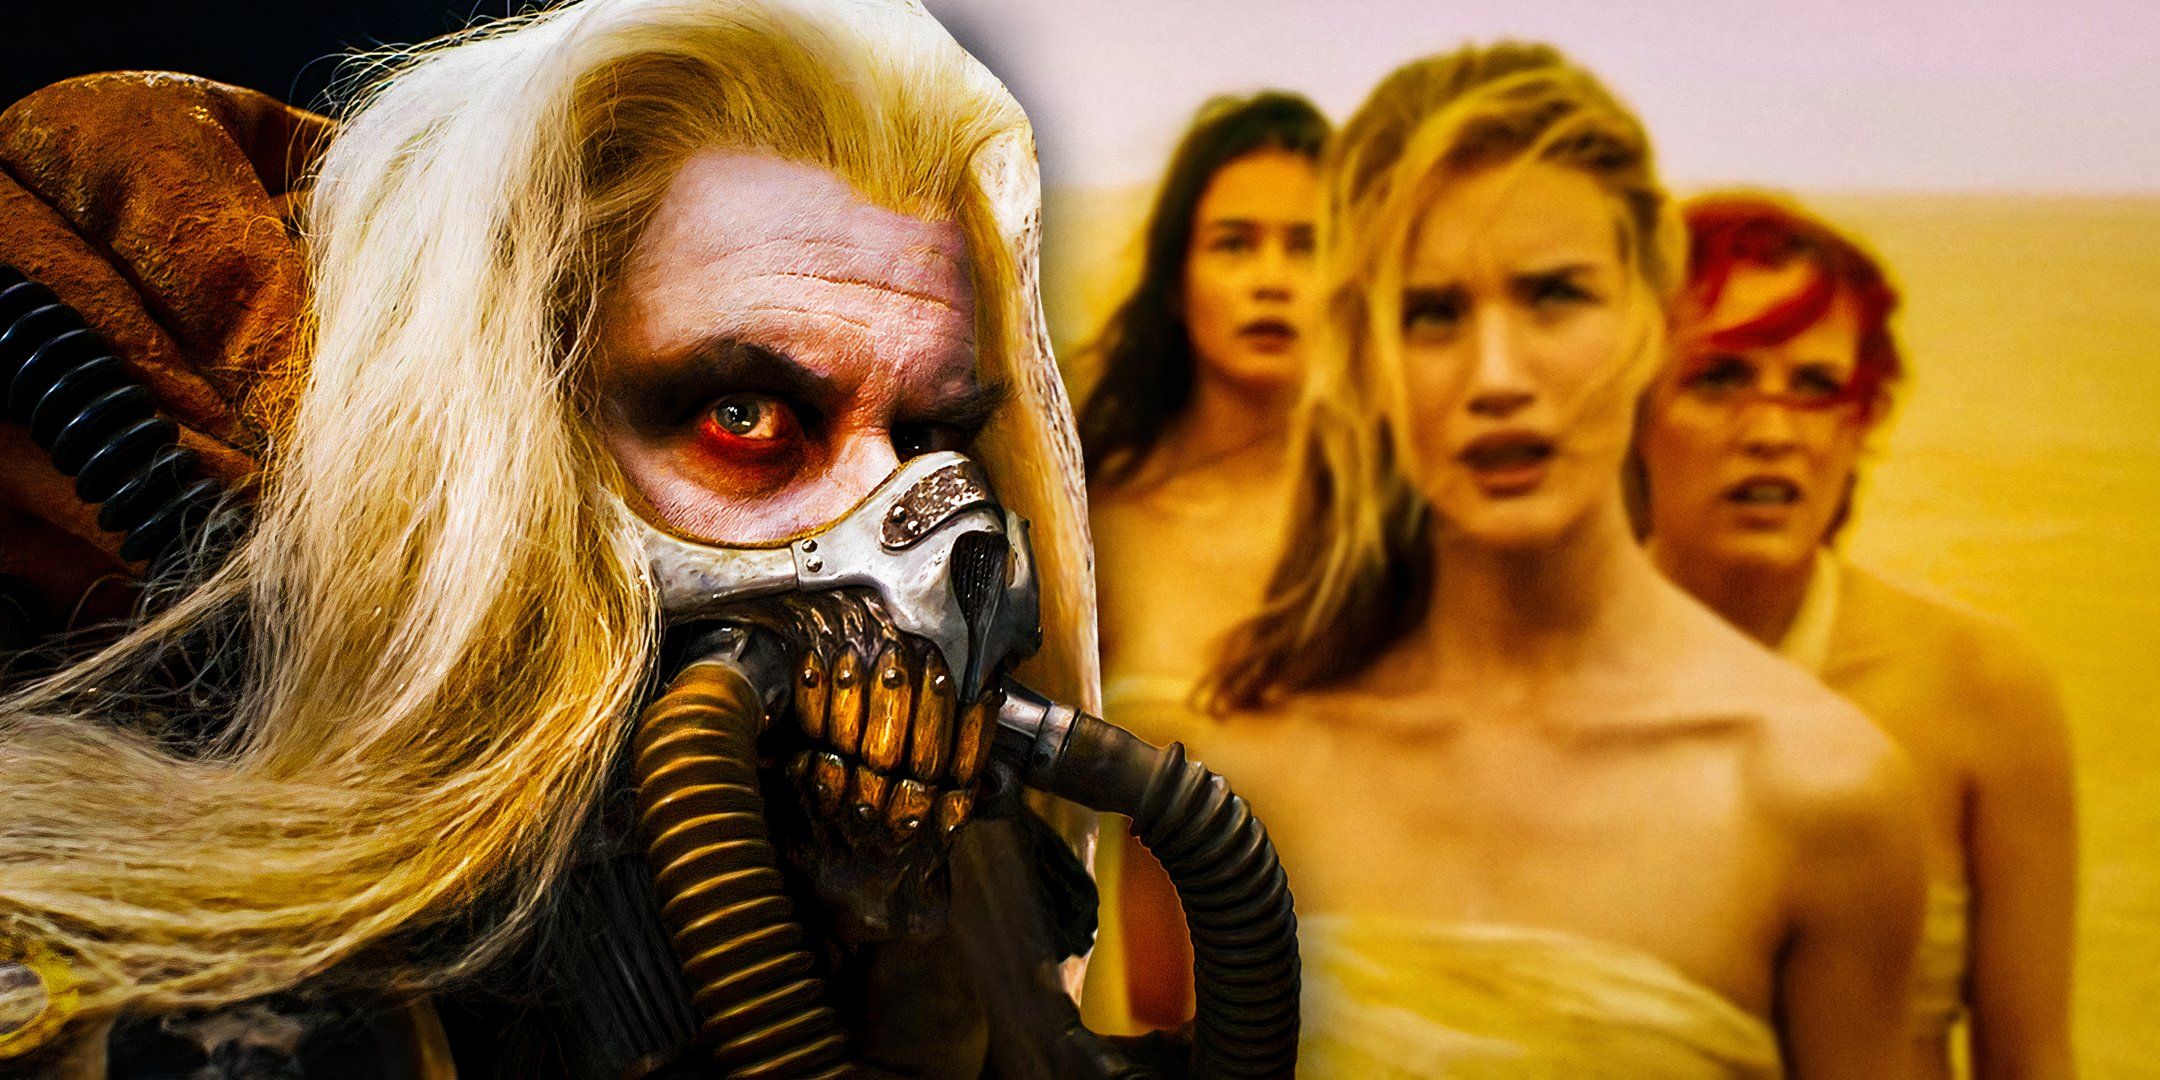 Immortan Joe (Hugh Keays-Byrne) and Angharad (Rosie Huntington-Whiteley), Capable (Riley Keough), and Cheedo the Fragile (Courtney Eaton) in Mad Max: Fury Road